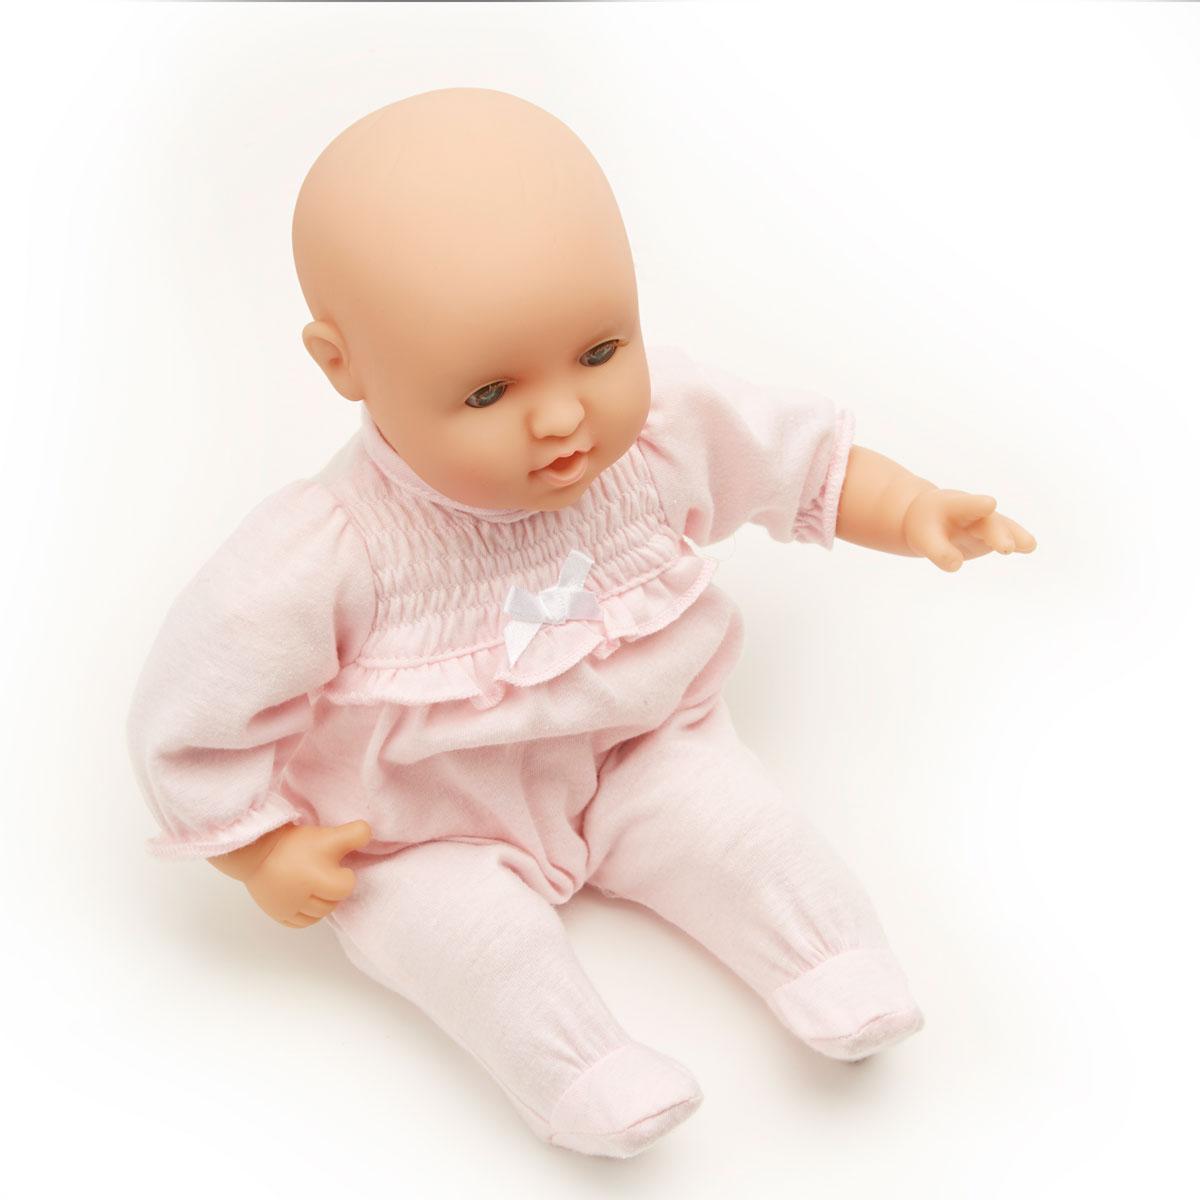 Jenna is the ideal, sweet smelling, first-born baby doll. 